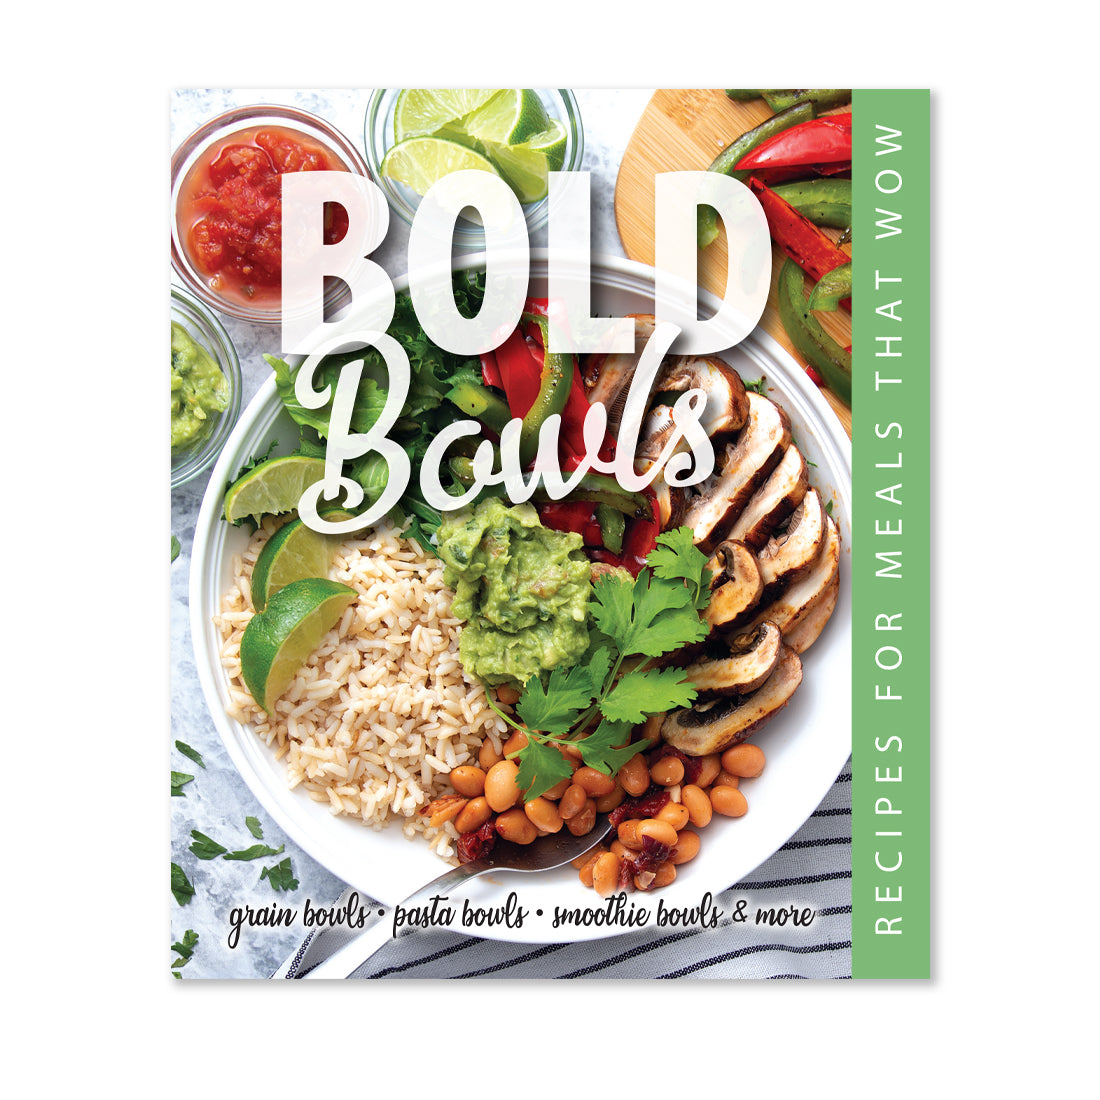 filling meals, great tasting, Great-Tasting Meals. Picture-Perfect Results. grain bowls, pasta bowls, smoothie bowls